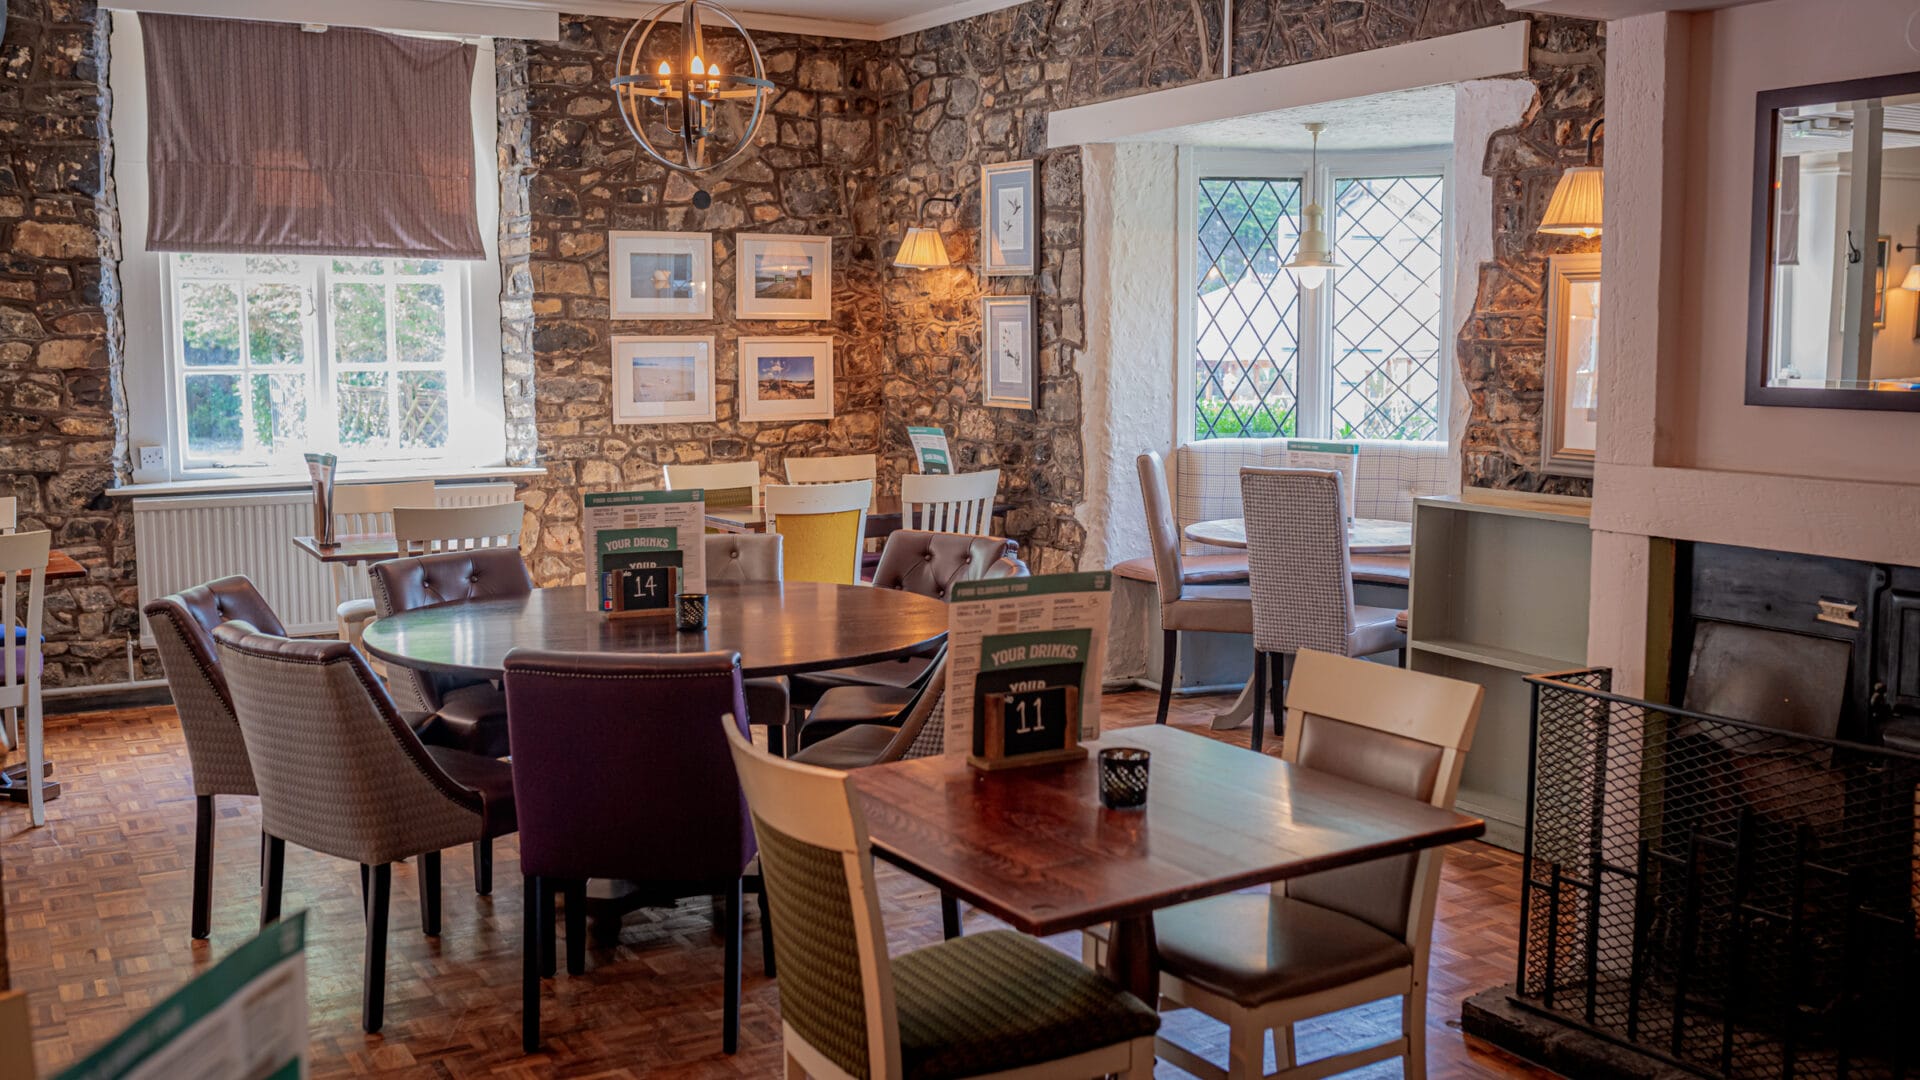 Lease A Pub In Swansea - The Gower Inn Is Available !